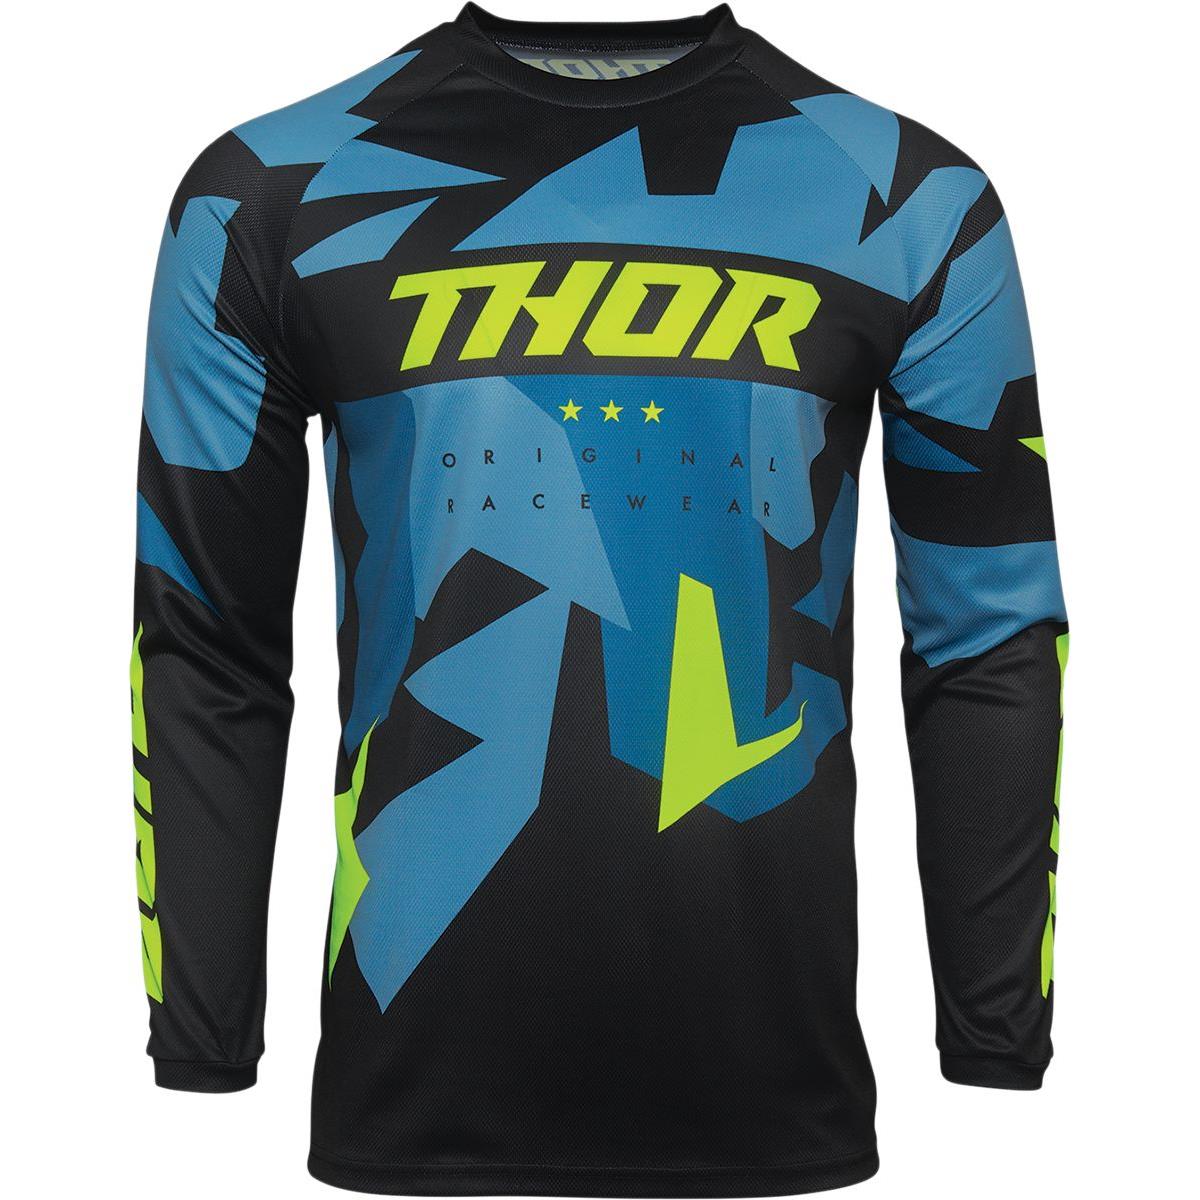 youth mx jersey